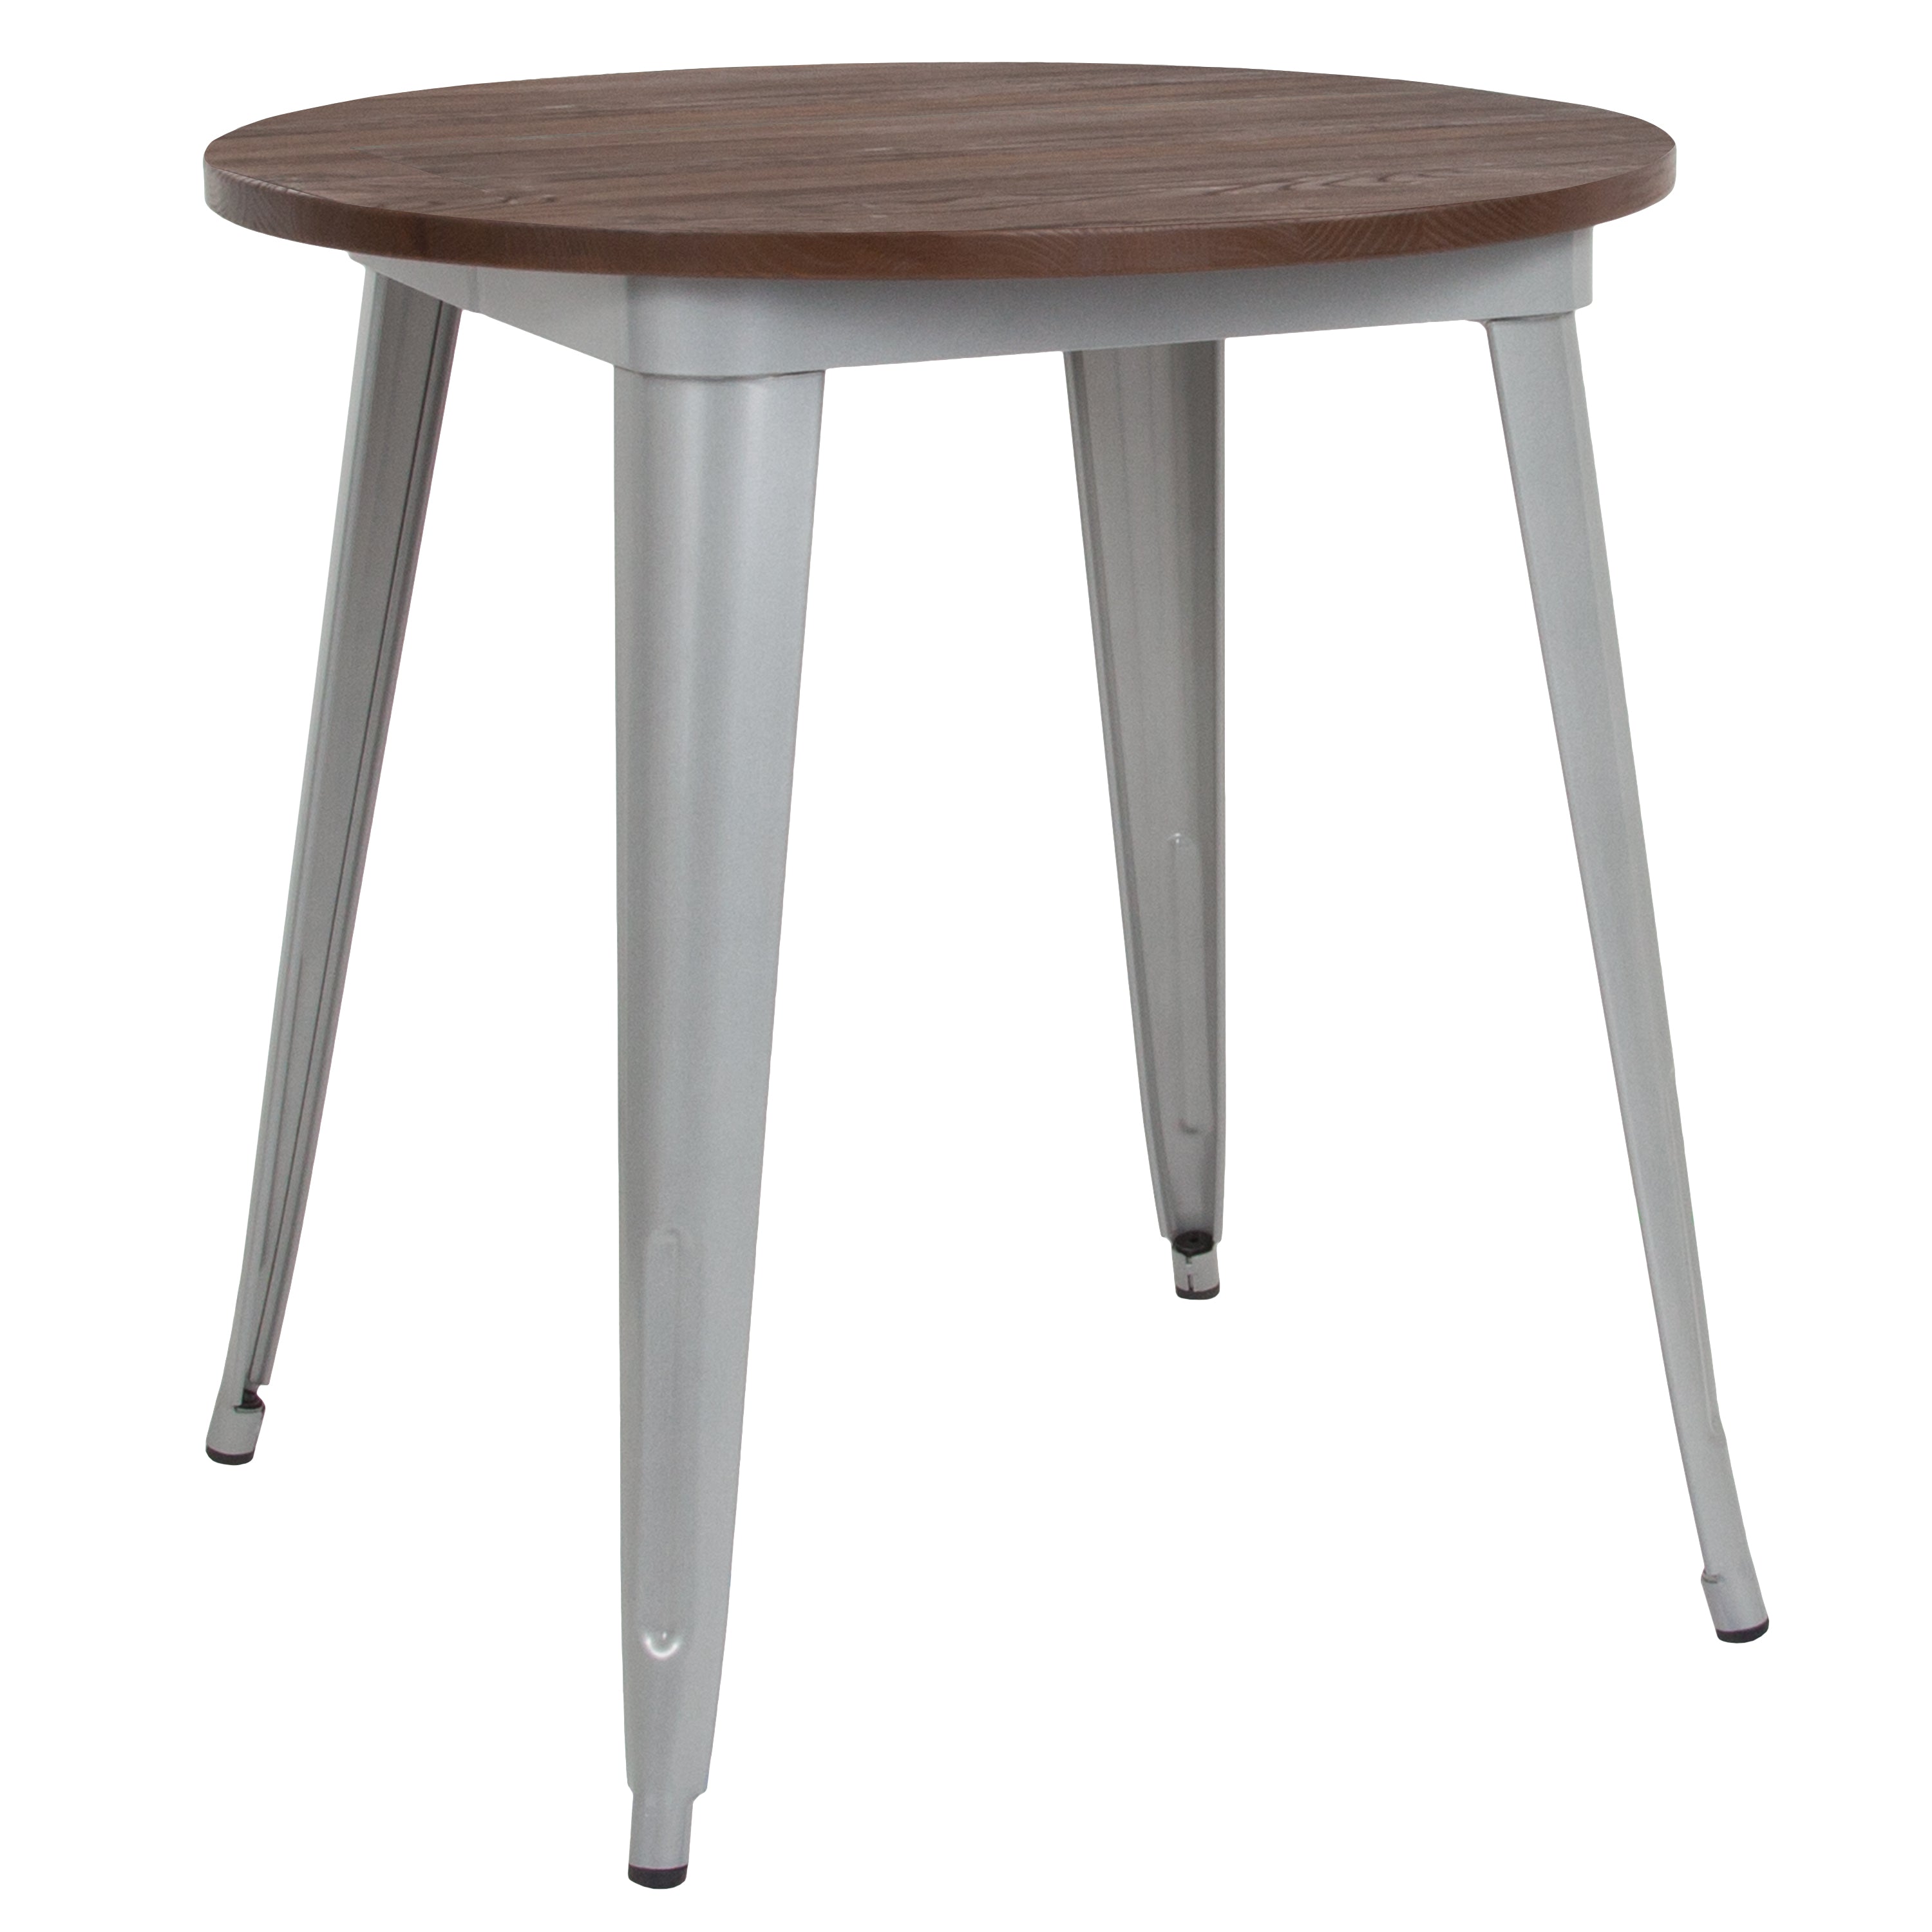 30" Round Metal Indoor Table with Rustic Wood Top-Metal/ Colorful Restaurant Table-Flash Furniture-Wall2Wall Furnishings